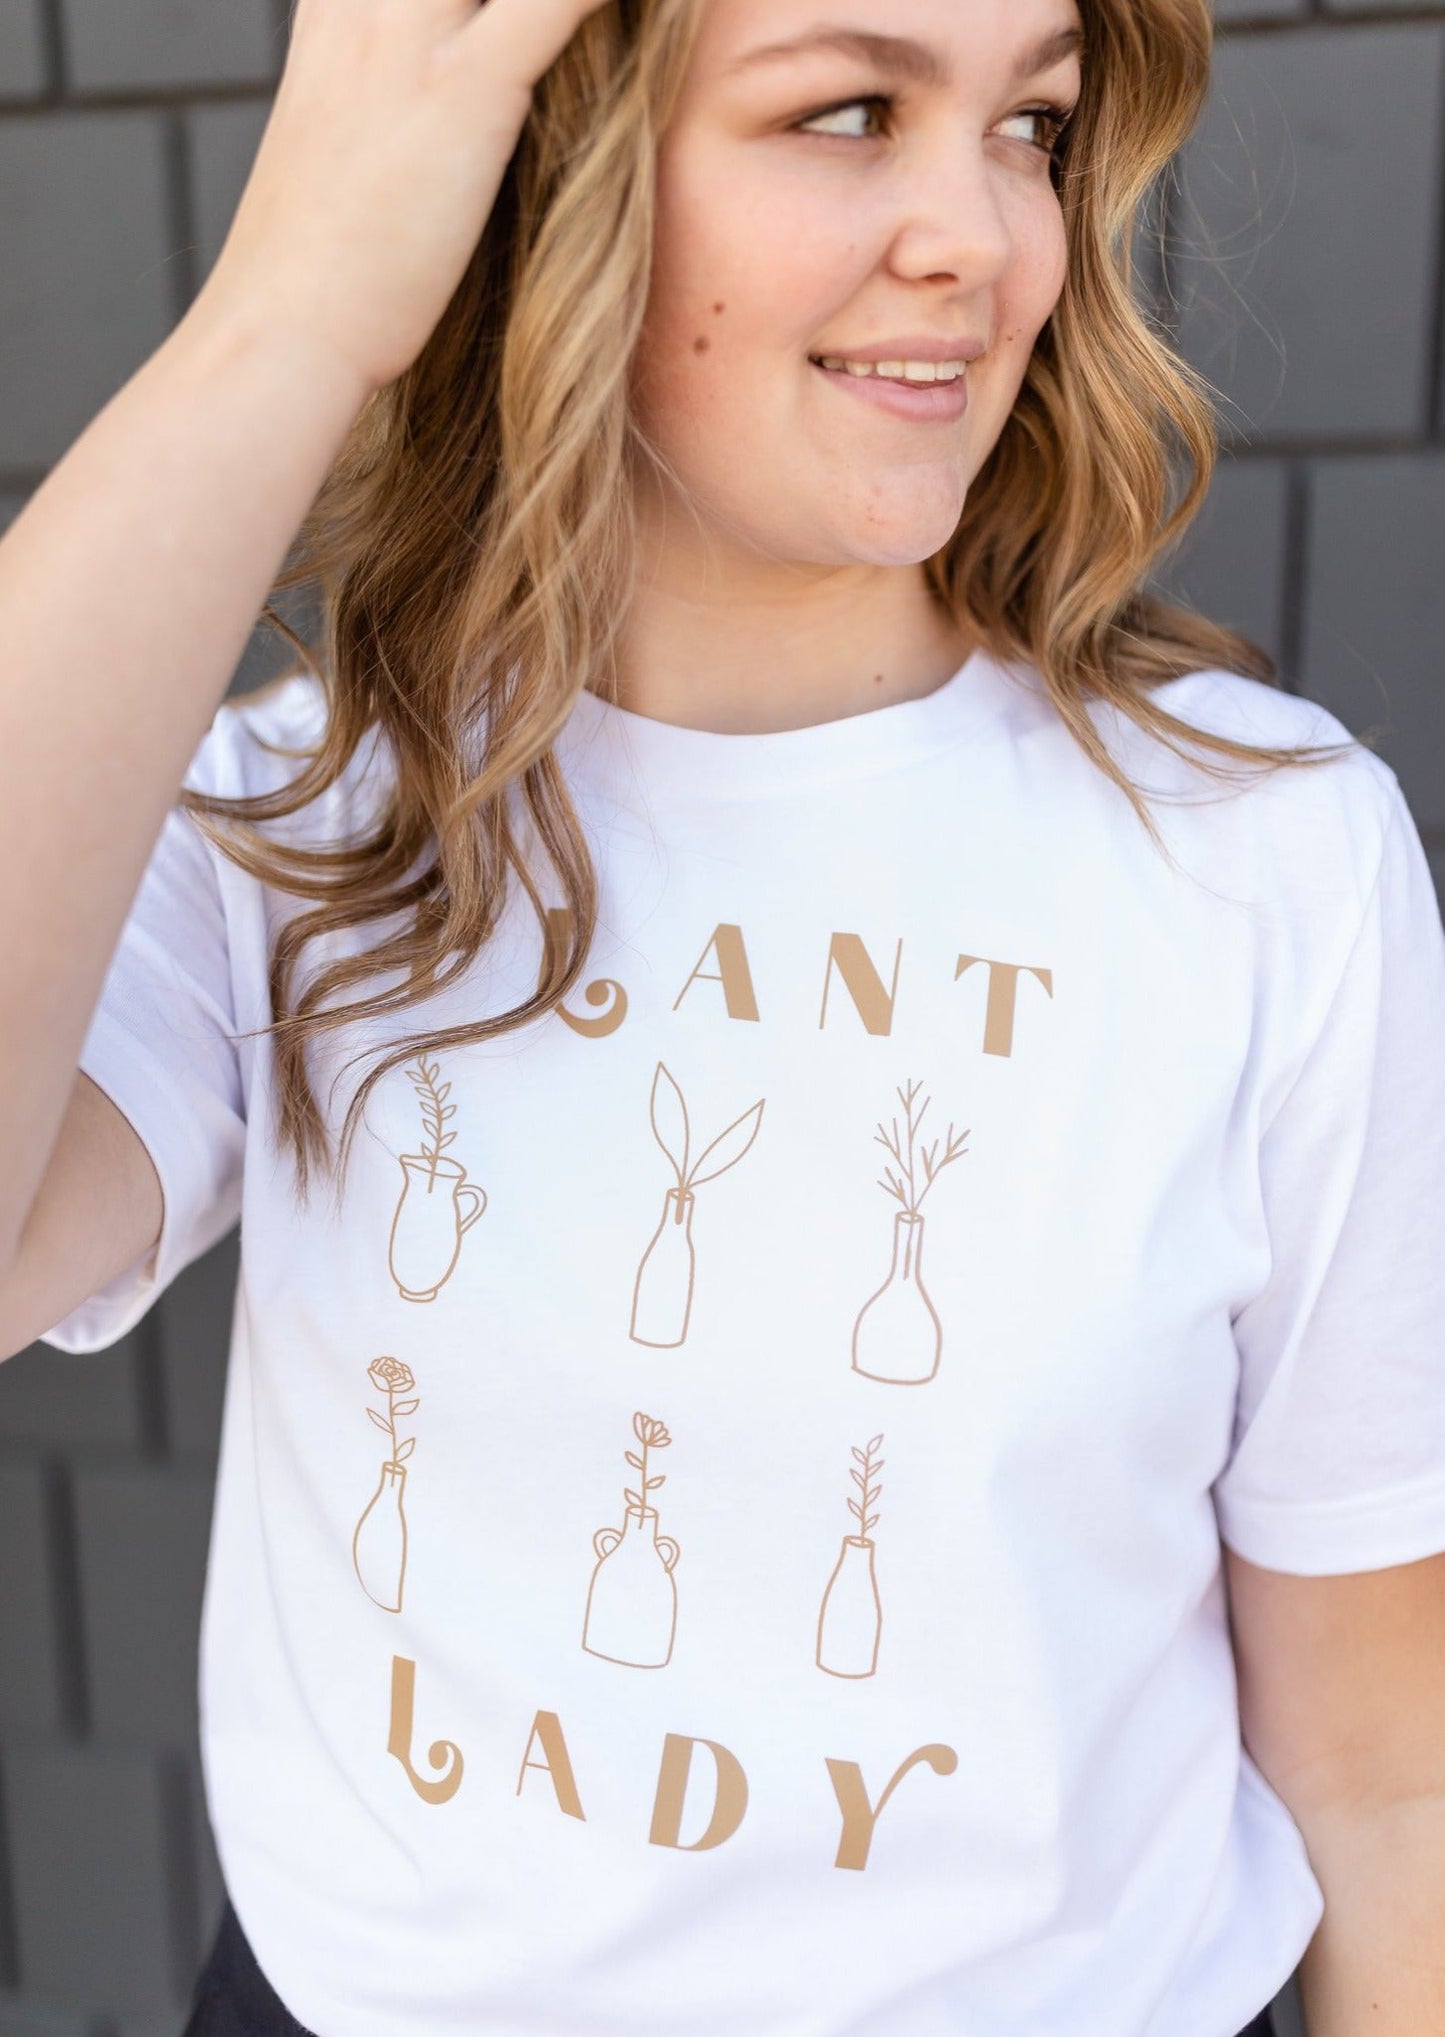 Plant Lady Graphic Tee - FINAL SALE Tops